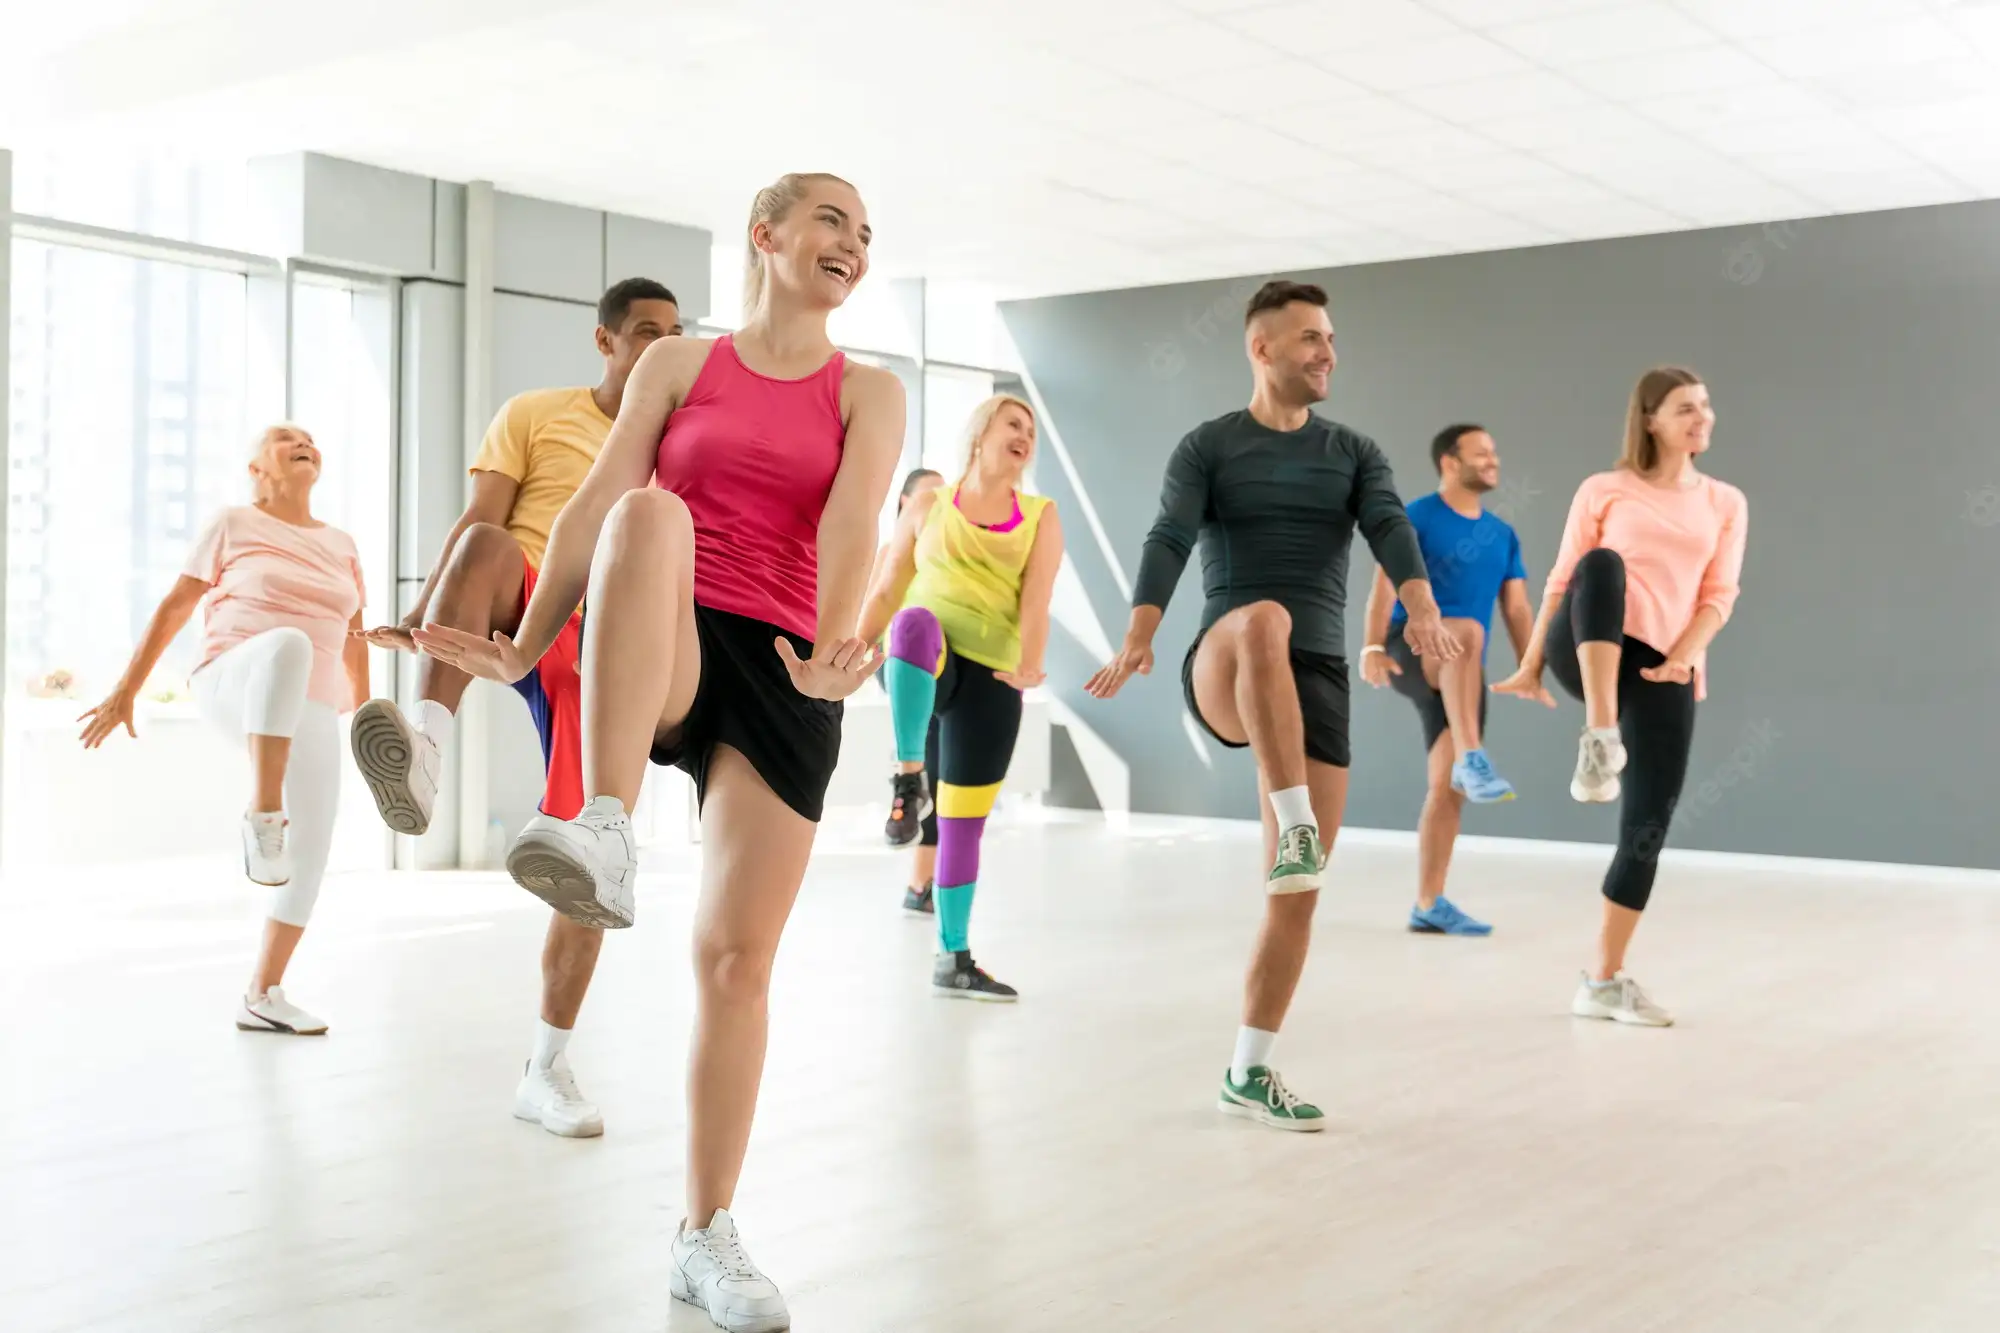 active-people-taking-part-zumba-class-together_23-2149074932